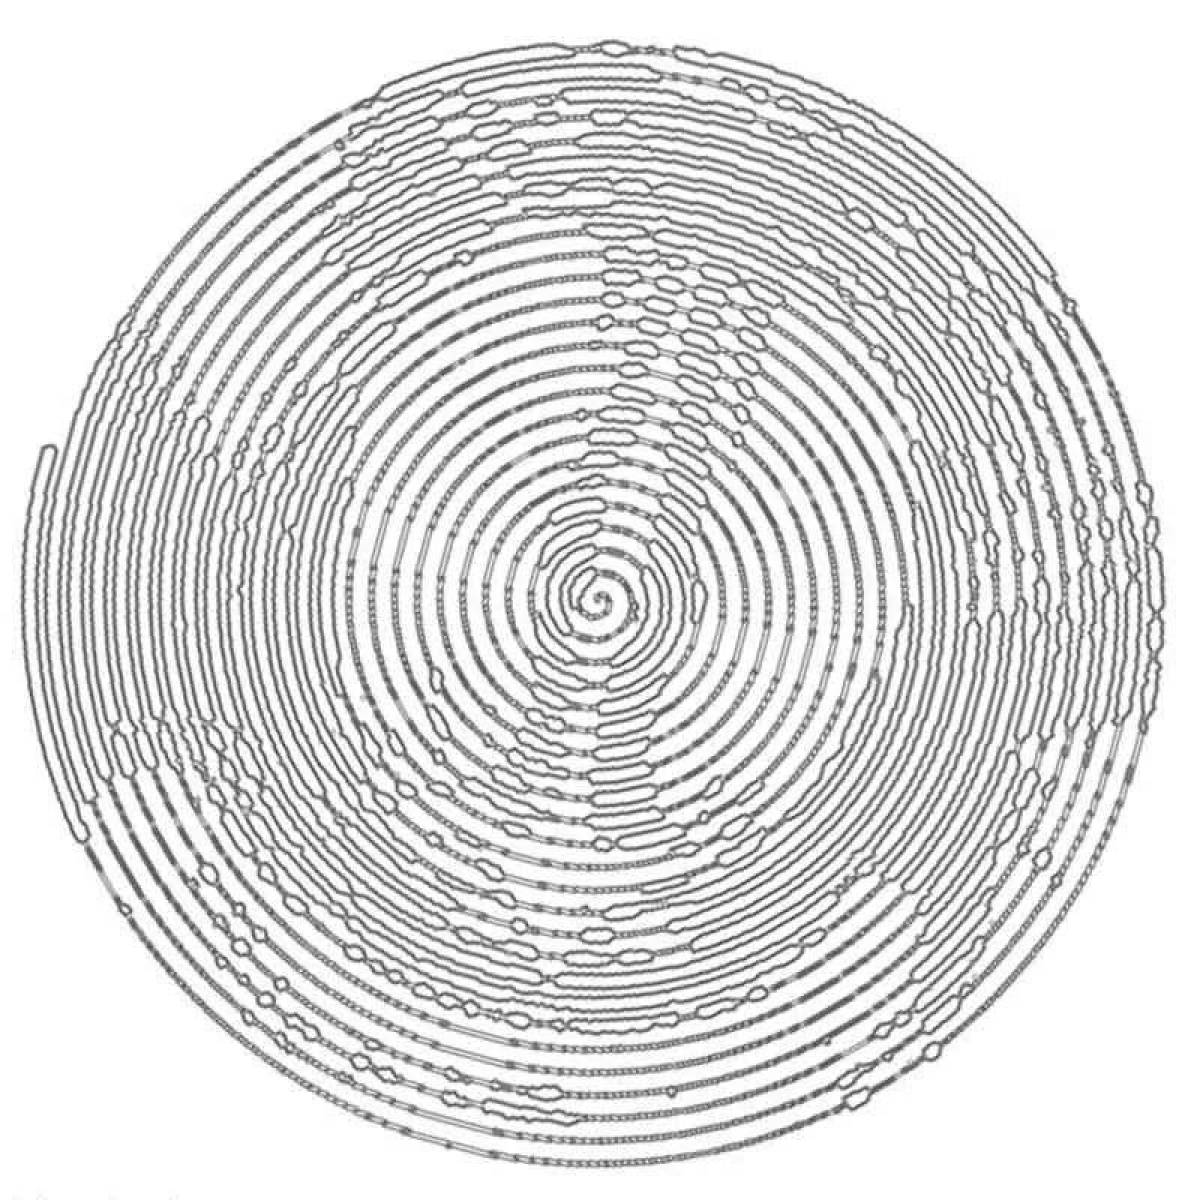 Calming round spiral coloring page